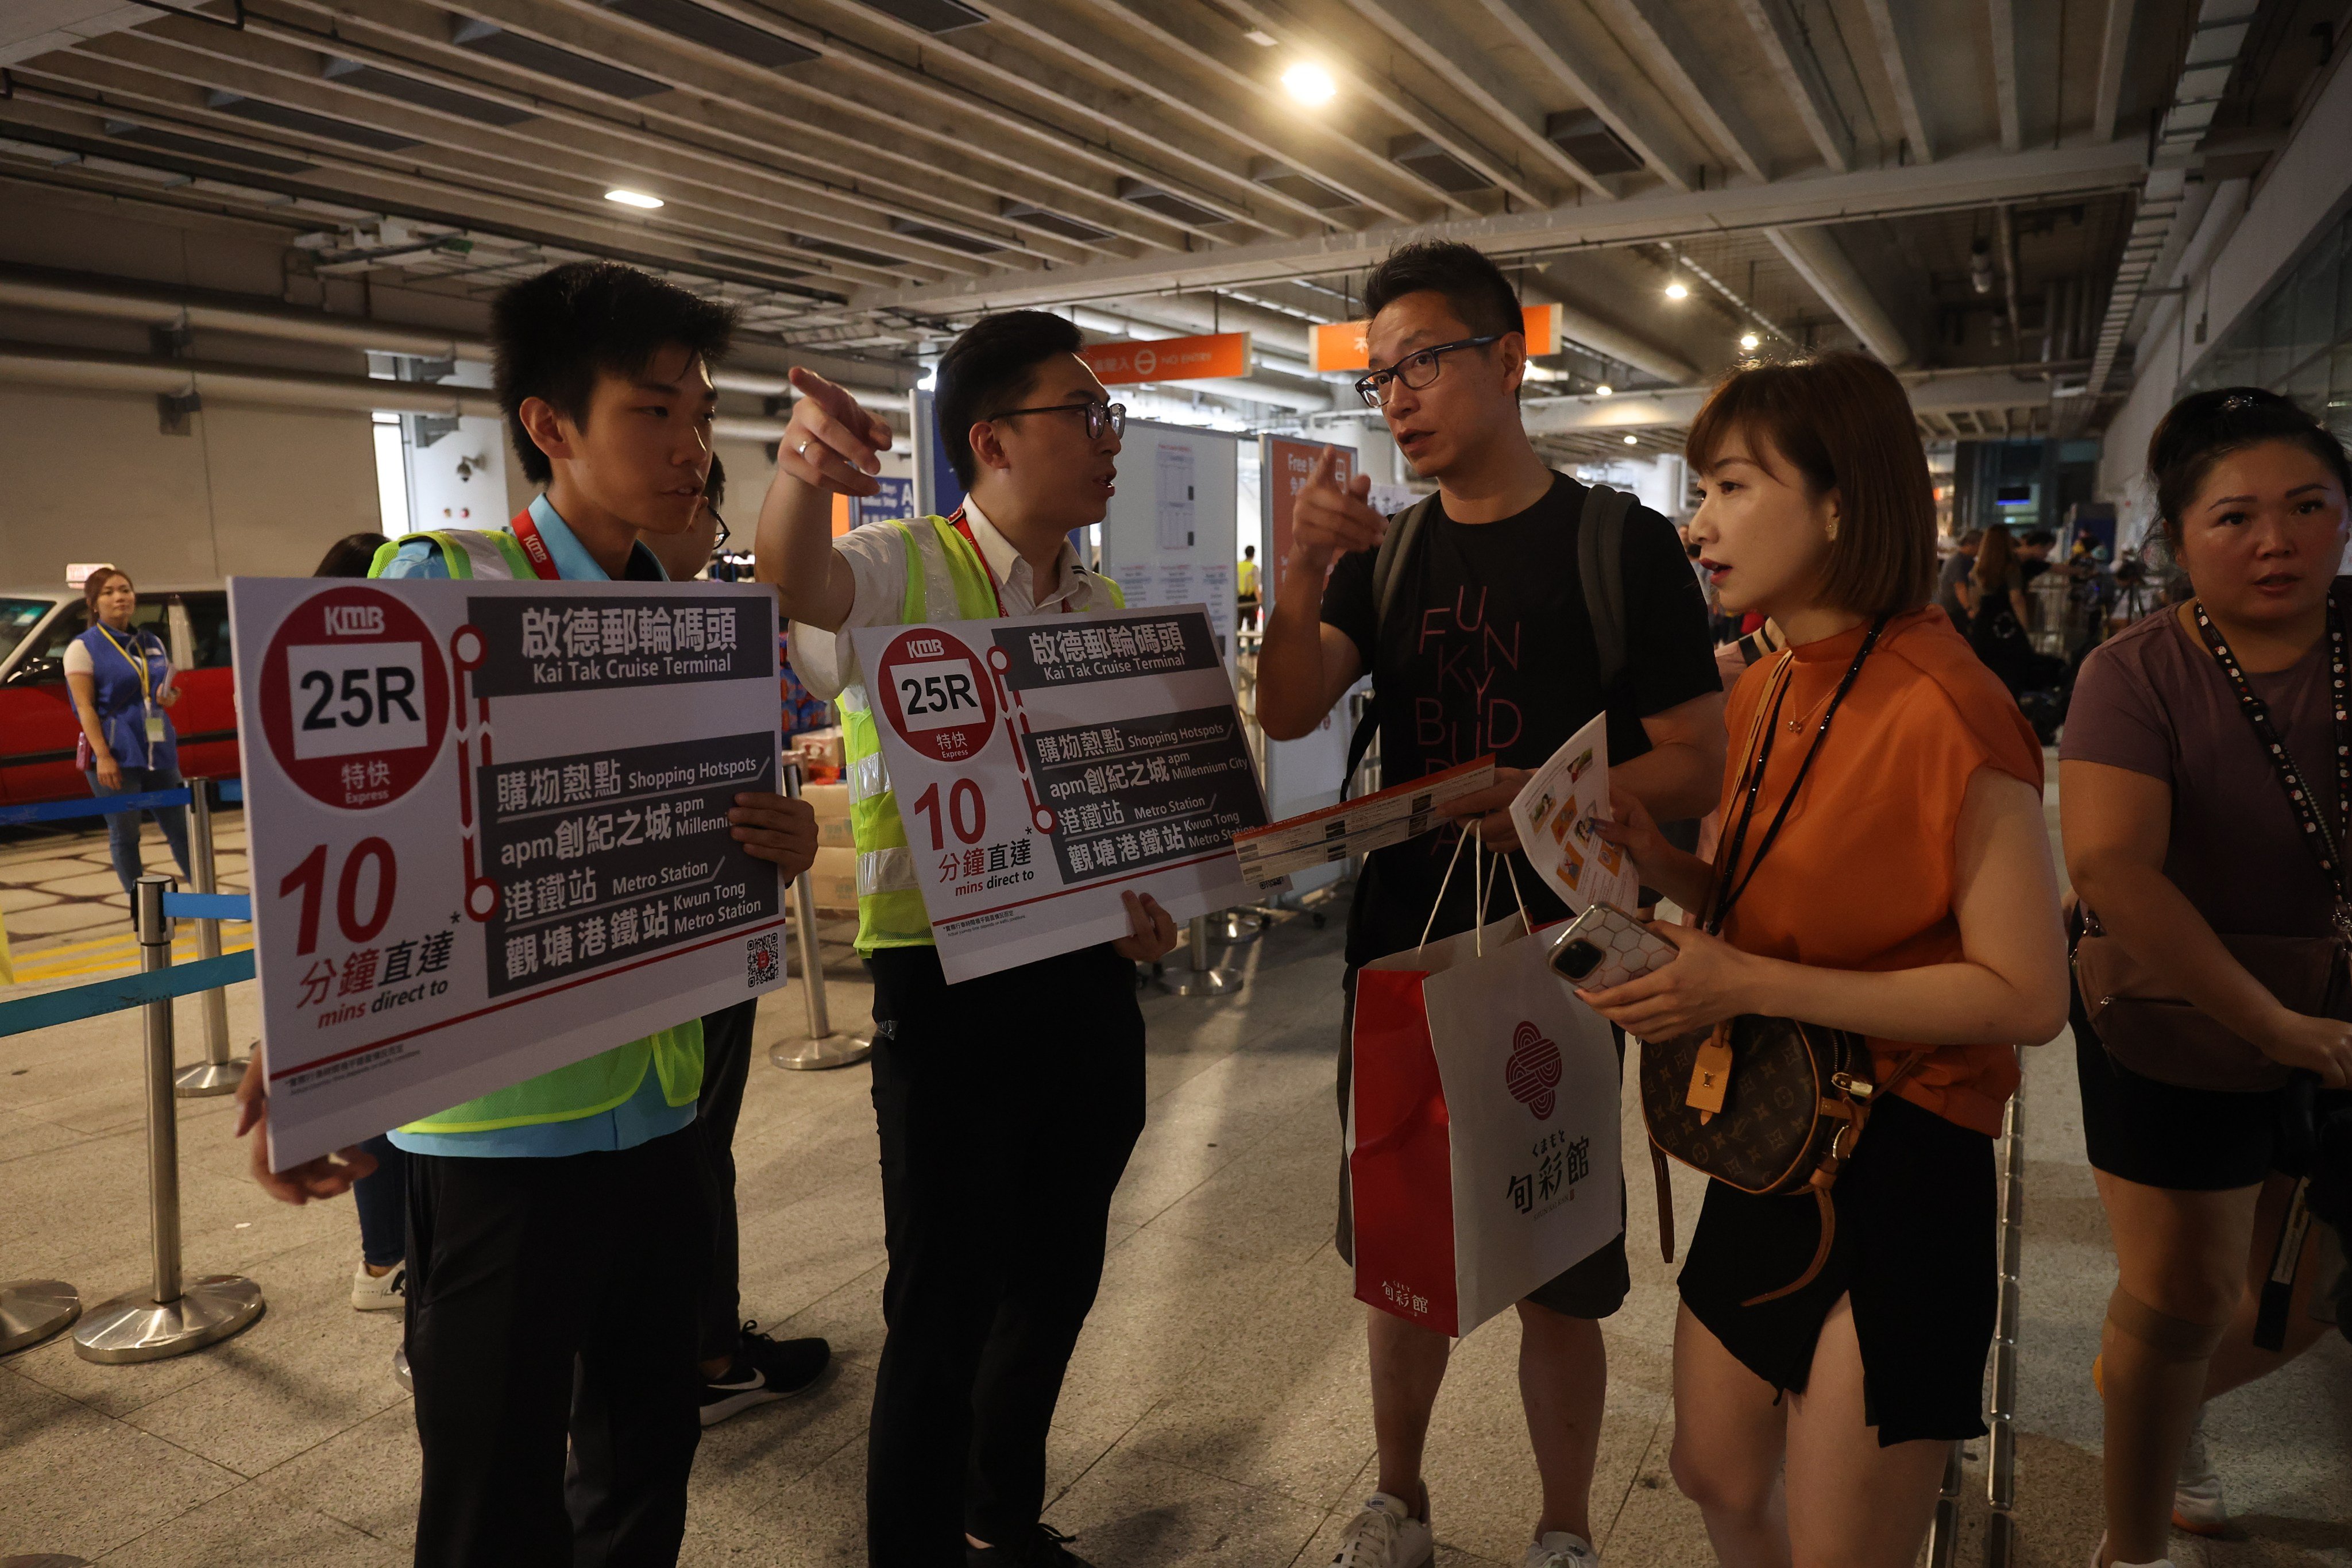 KMB Bus staff give directions to arriving passengers from the cruise ship “Spectrum of the Sea” at Kai Tak Cruise Terminal on August 19. Photo: Edmond So